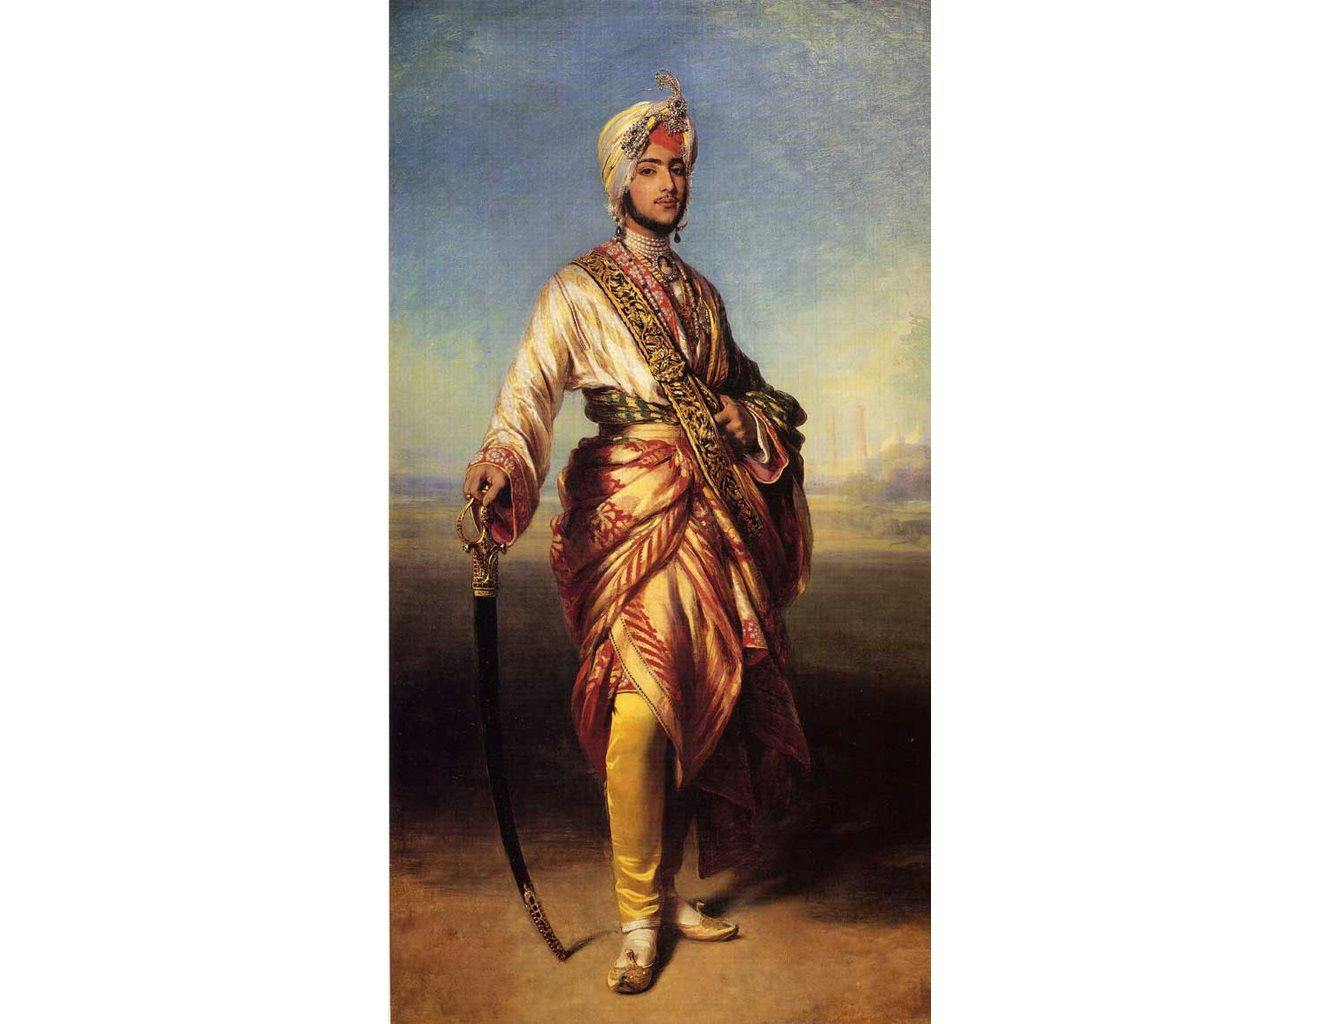 The most iconic image of Maharaja Duleep Singh remains this portrait painted by the Artist Franz Winterhalter which was commissioned by Queen Victoria. It remains in Osbourne House, on the Isle of Wight which was her favourite residence.